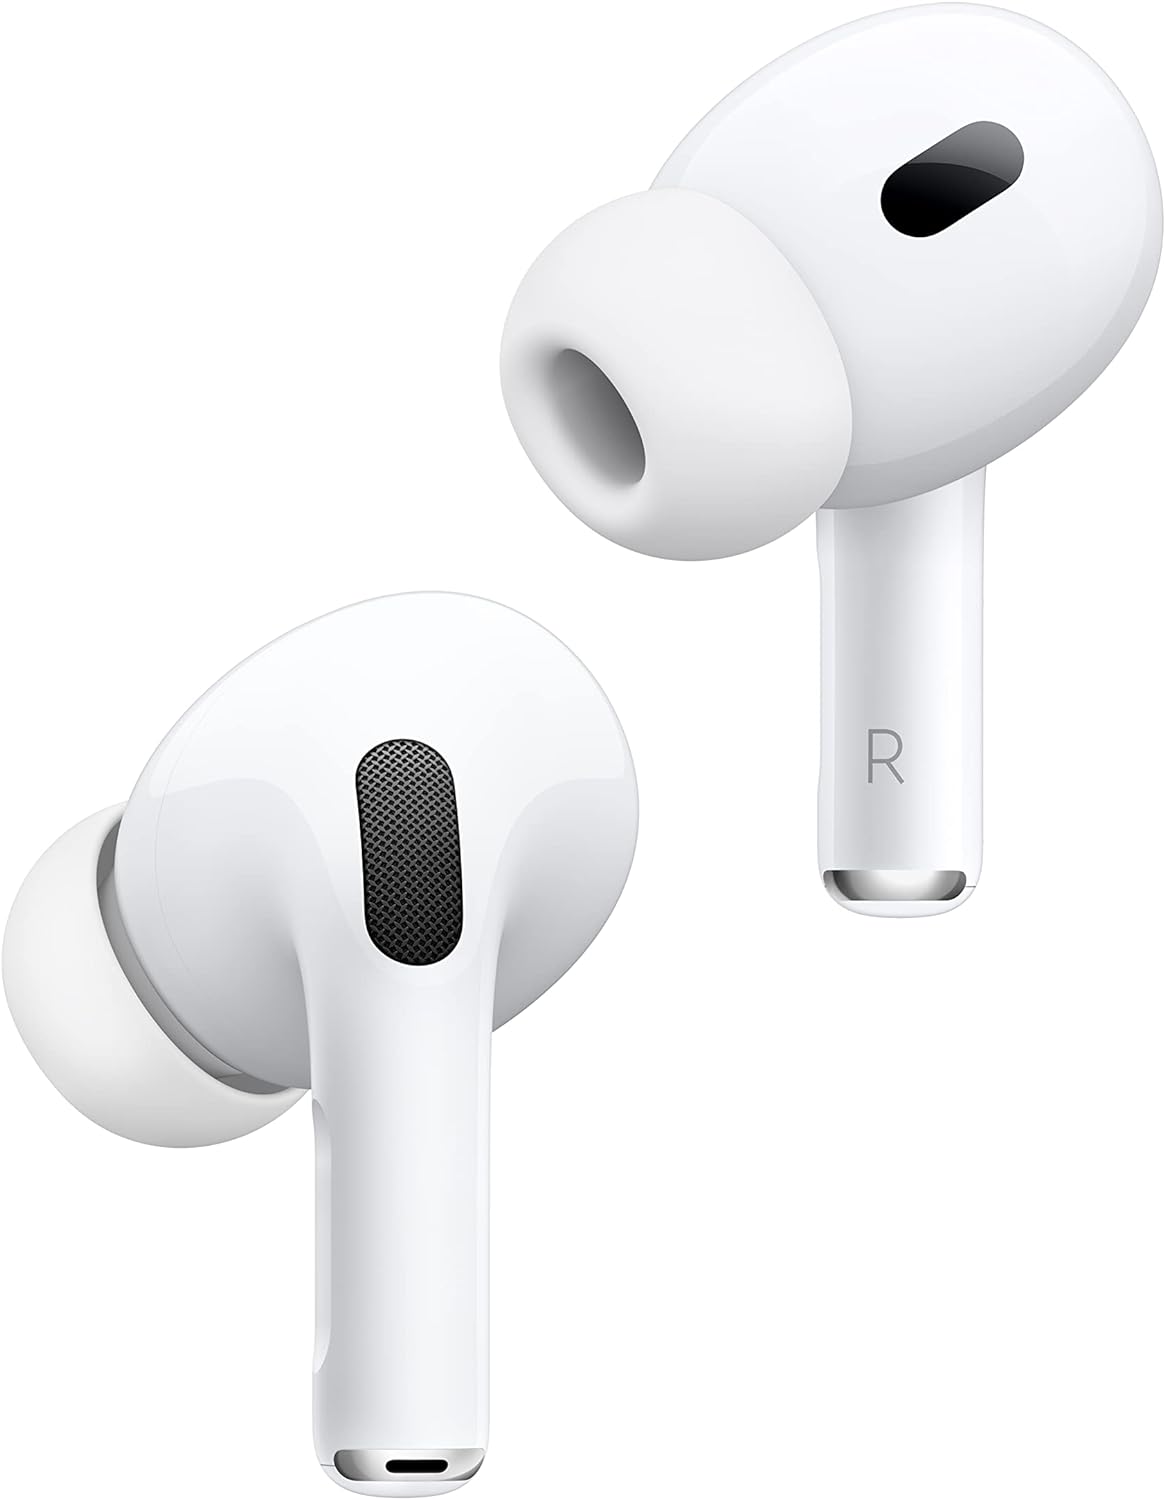 AirPods Pro (2nd gen) with MagSafe Case - Advanced H2 chip for superior audio performance. 0195949052620